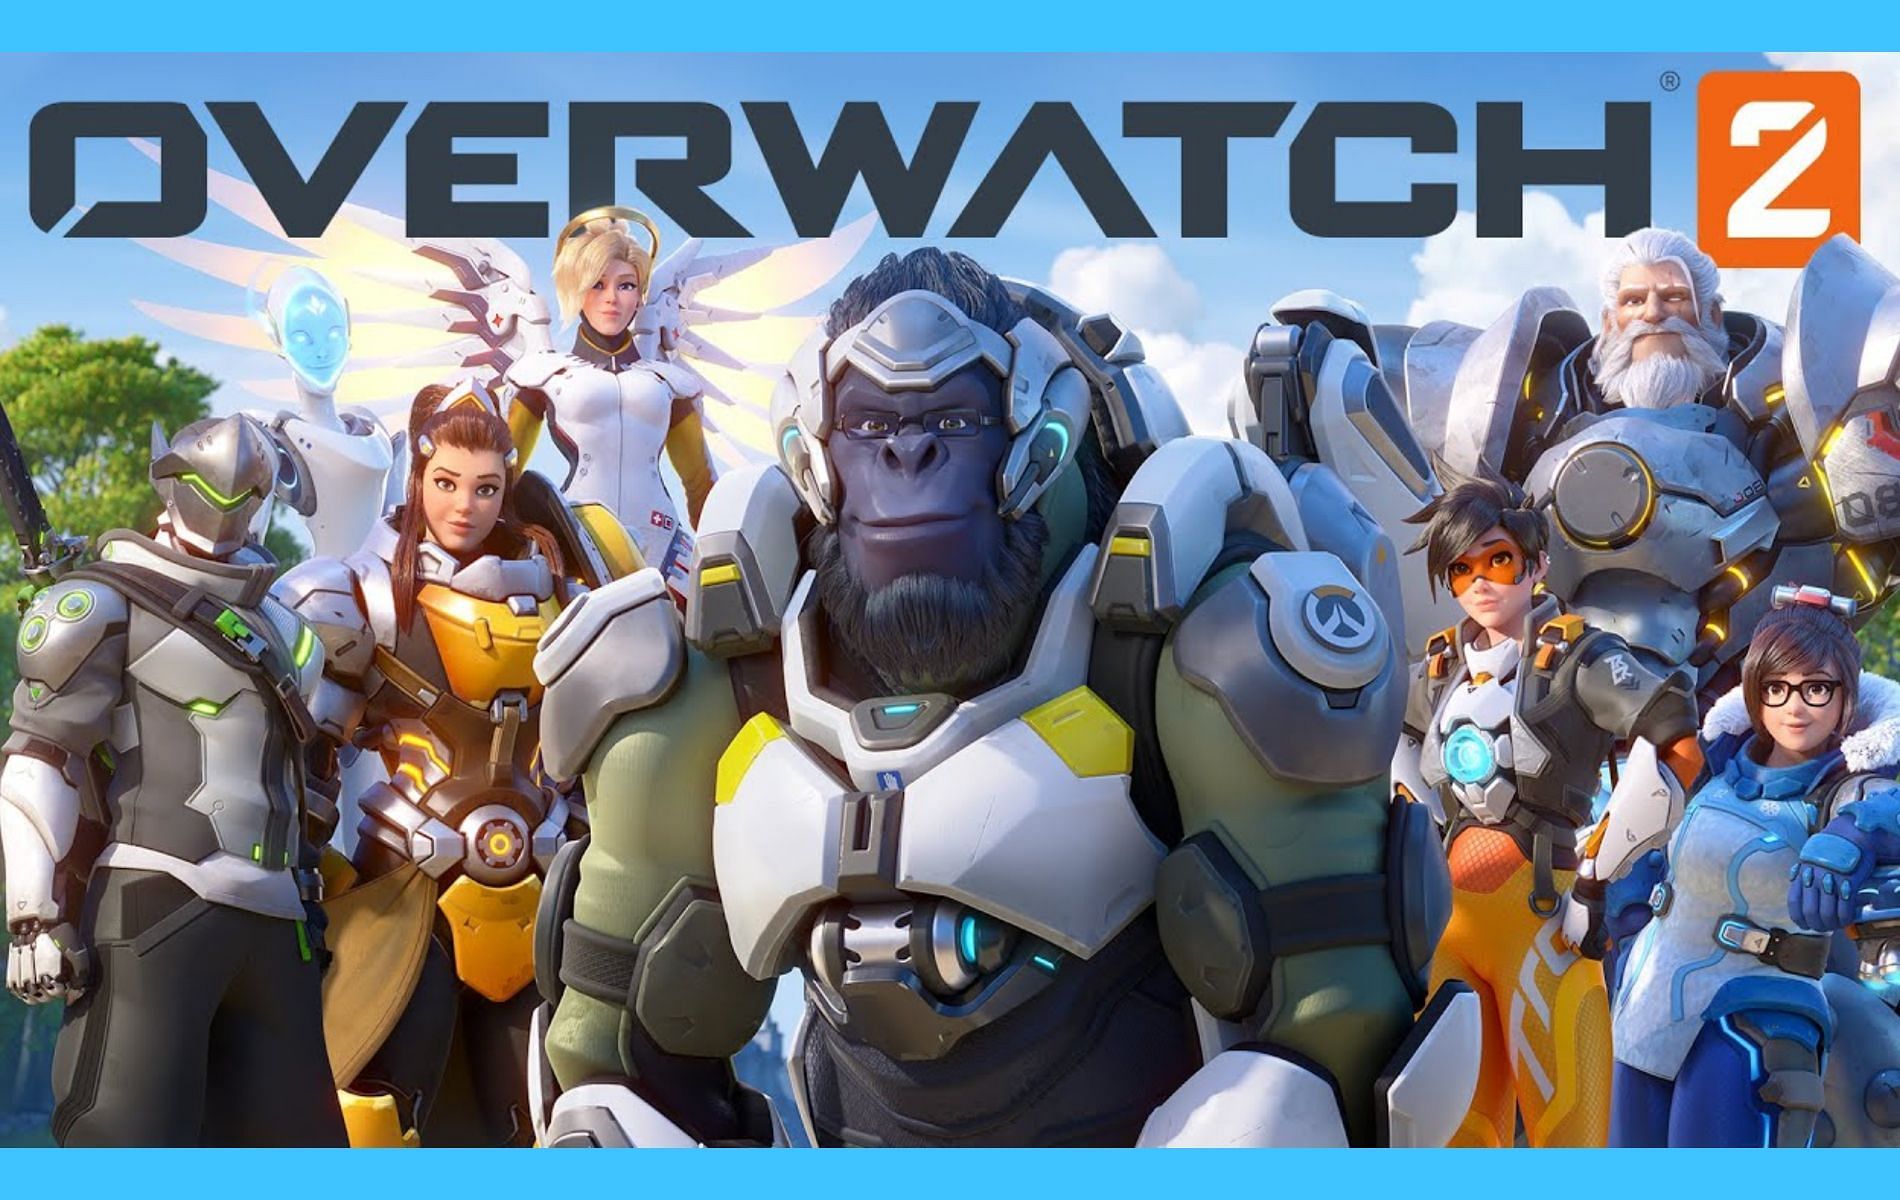 Overwatch "Voice Chat not working" error: How to fix, causes, and more